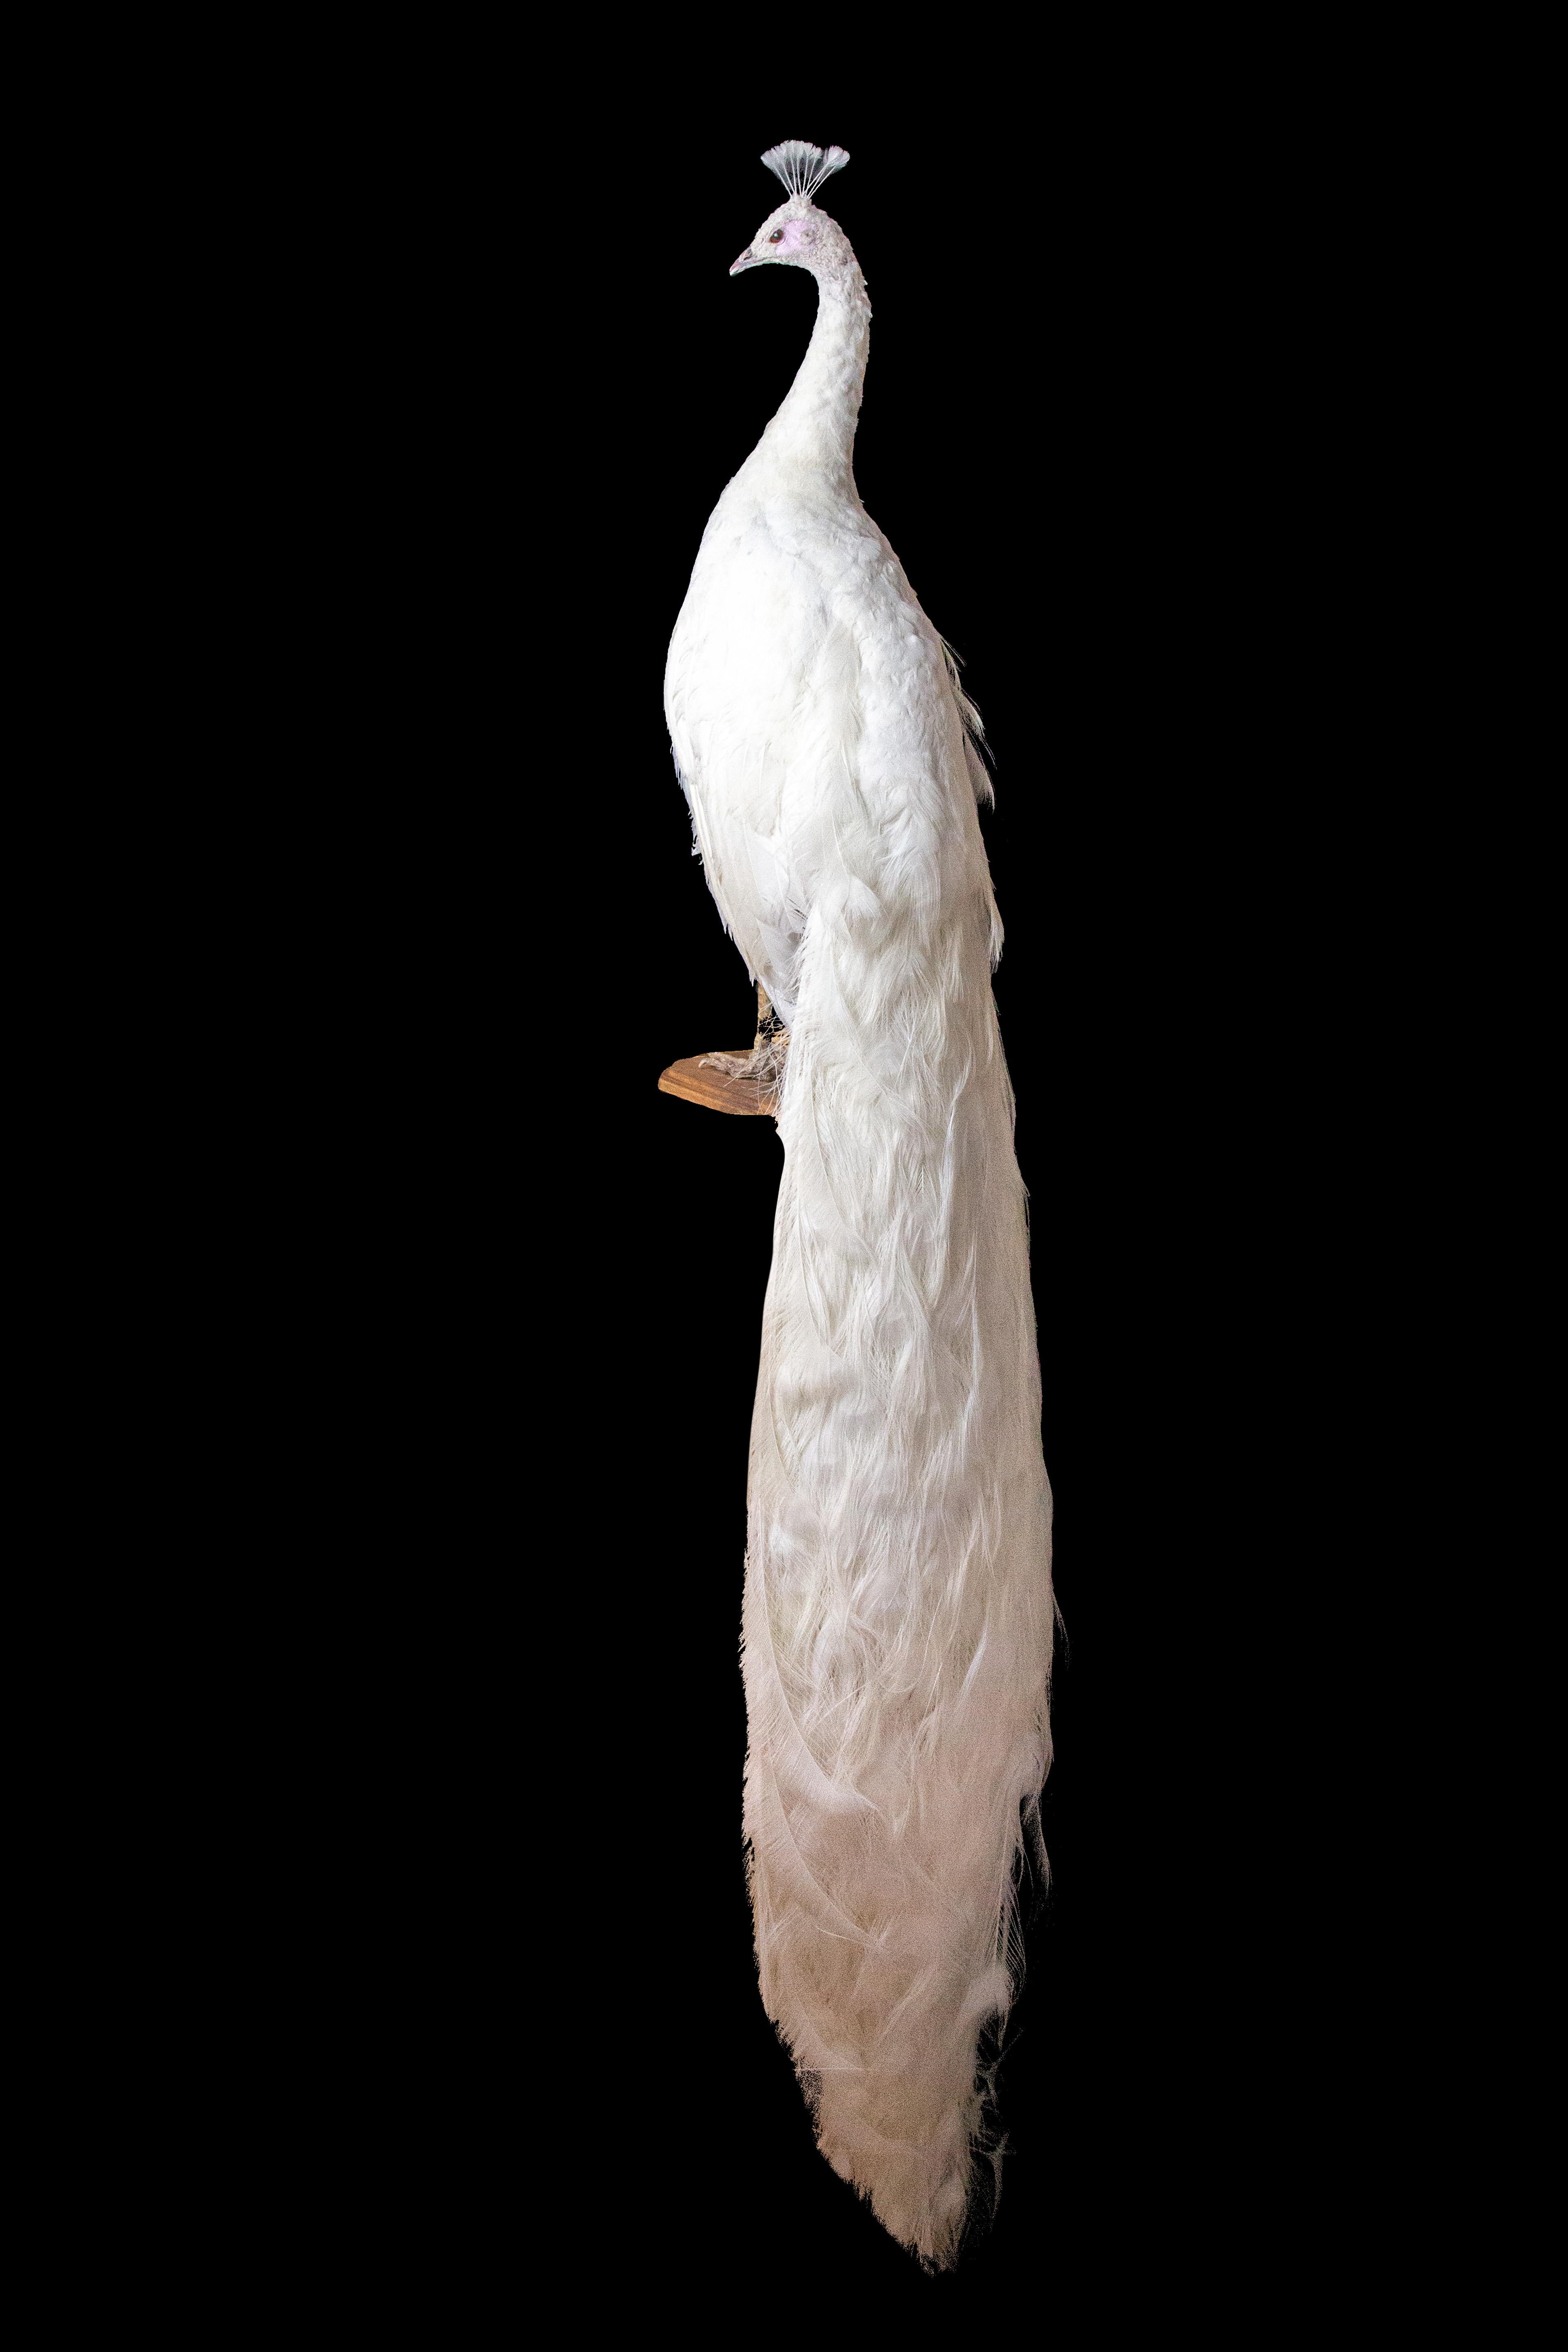 This stunning taxidermy specimen features an albino (leucistic) peacock, expertly mounted on an oval wooden base. The peacock's unique coloring is captured in exquisite detail, with pristine white feathers covering the body, and long, flowing neck